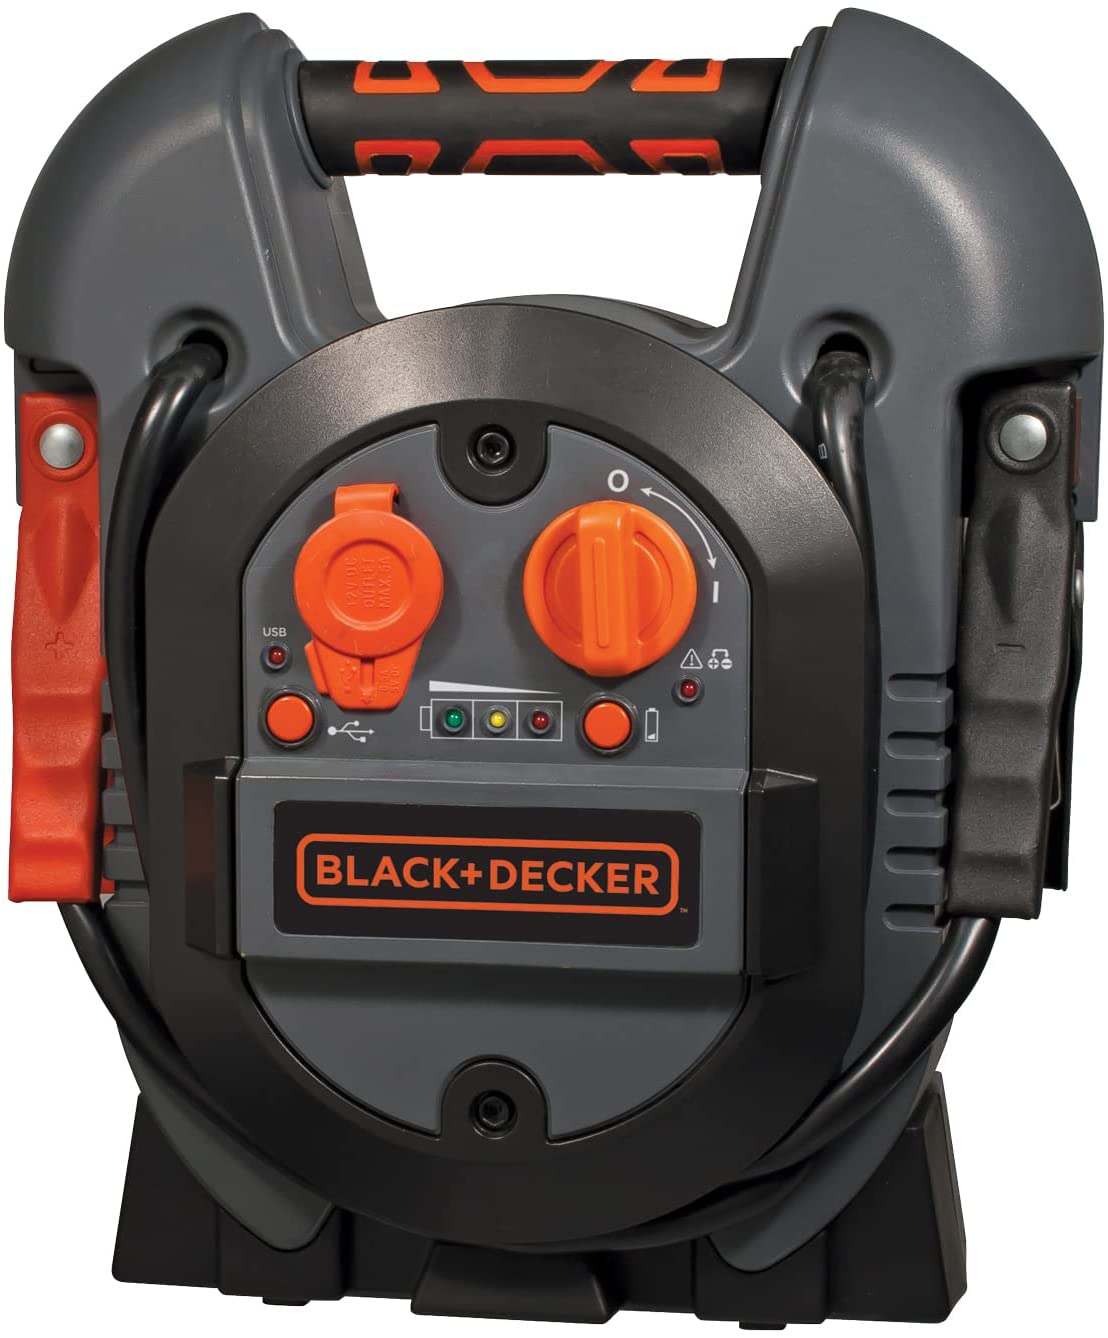 Black+decker PI500B 500W Power Inverter: Dual 120V AC Outlets, 3.1a USB Ports, 12V DC Adapter, Battery Clamps